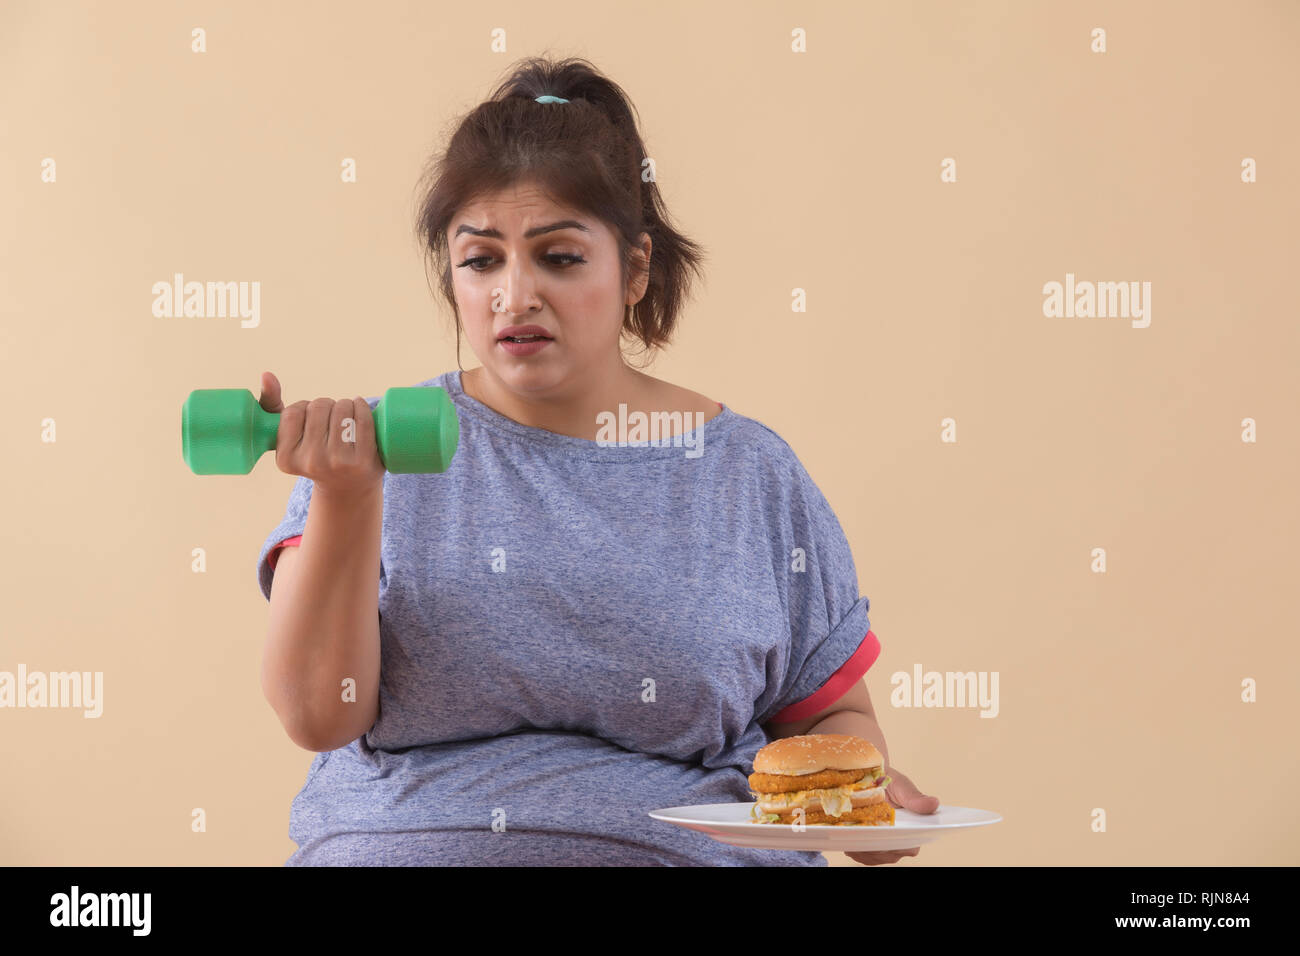 Sad Overweight Woman holding a burger and dumbbell Stock Photo